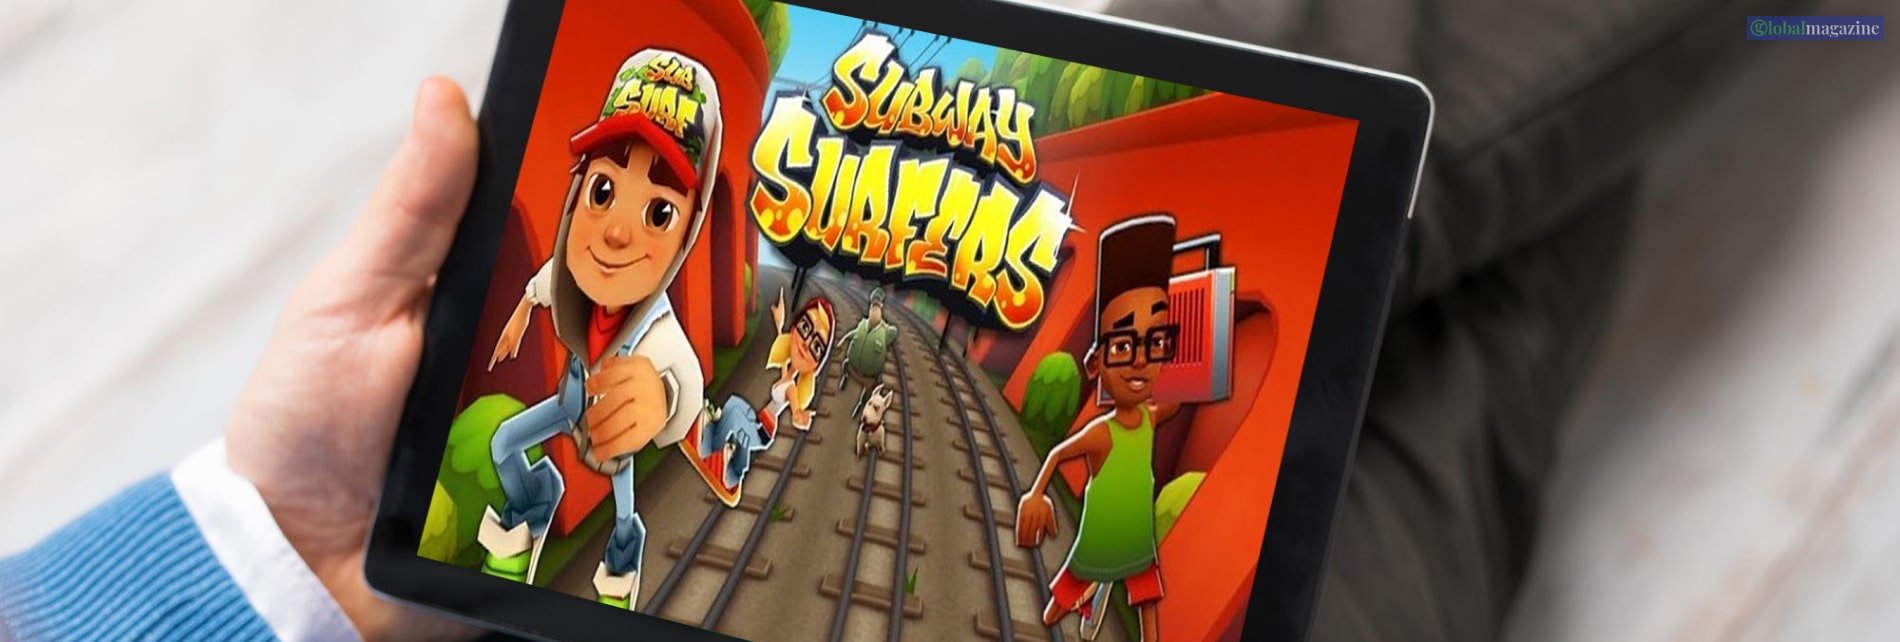 Play Subway Surfers Online - Chrome Extension